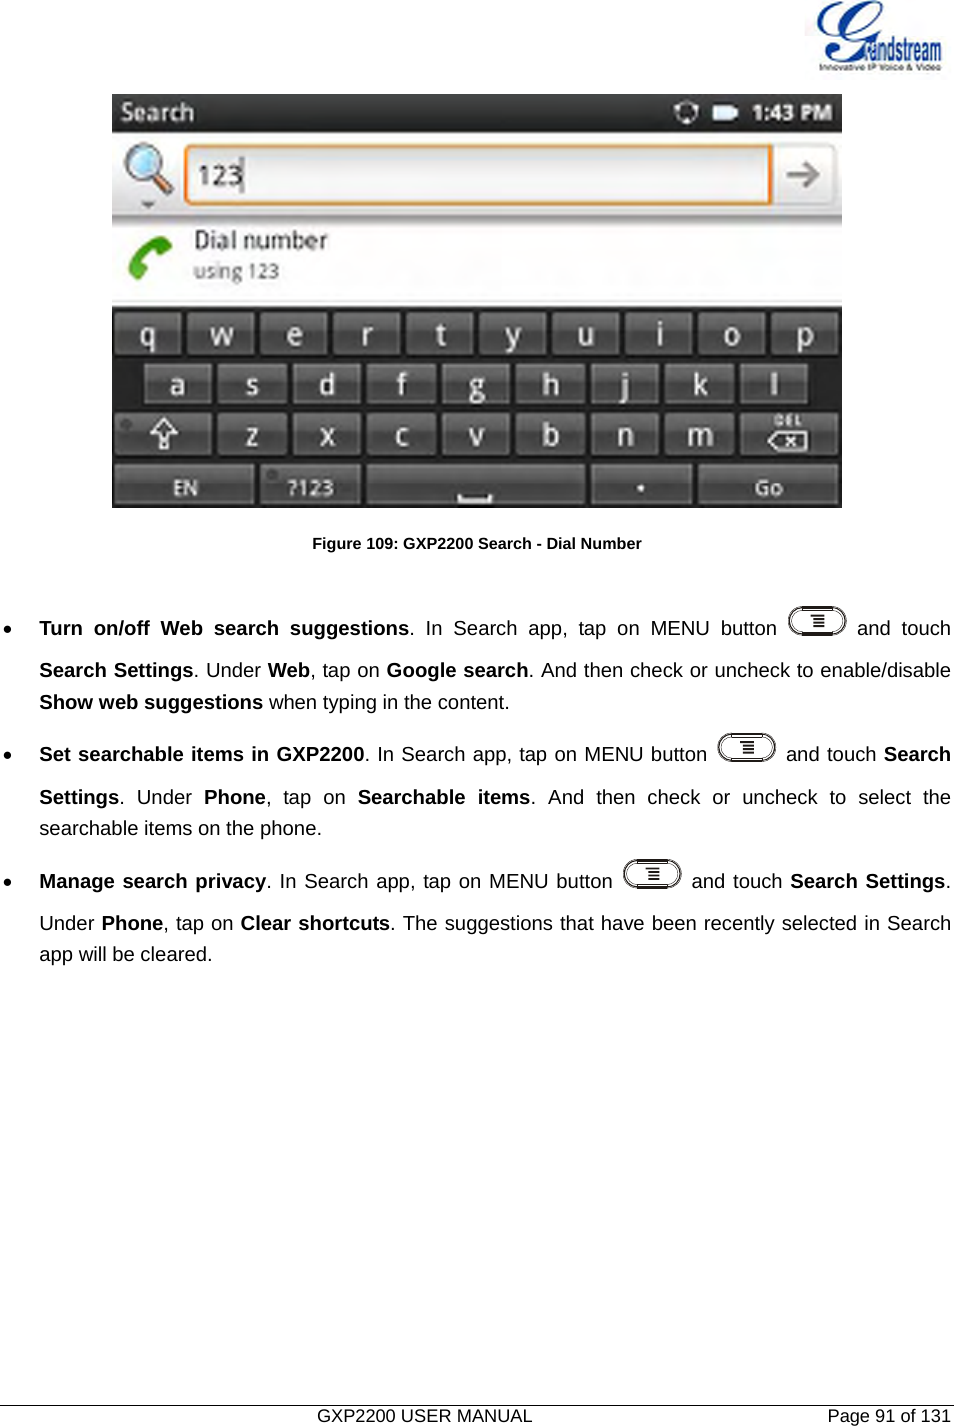   GXP2200 USER MANUAL       Page 91 of 131                                  Figure 109: GXP2200 Search - Dial Number  • Turn on/off Web search suggestions. In Search app, tap on MENU button   and touch Search Settings. Under Web, tap on Google search. And then check or uncheck to enable/disable Show web suggestions when typing in the content. • Set searchable items in GXP2200. In Search app, tap on MENU button   and touch Search Settings. Under Phone, tap on Searchable items. And then check or uncheck to select the searchable items on the phone.   • Manage search privacy. In Search app, tap on MENU button   and touch Search Settings. Under Phone, tap on Clear shortcuts. The suggestions that have been recently selected in Search app will be cleared. 